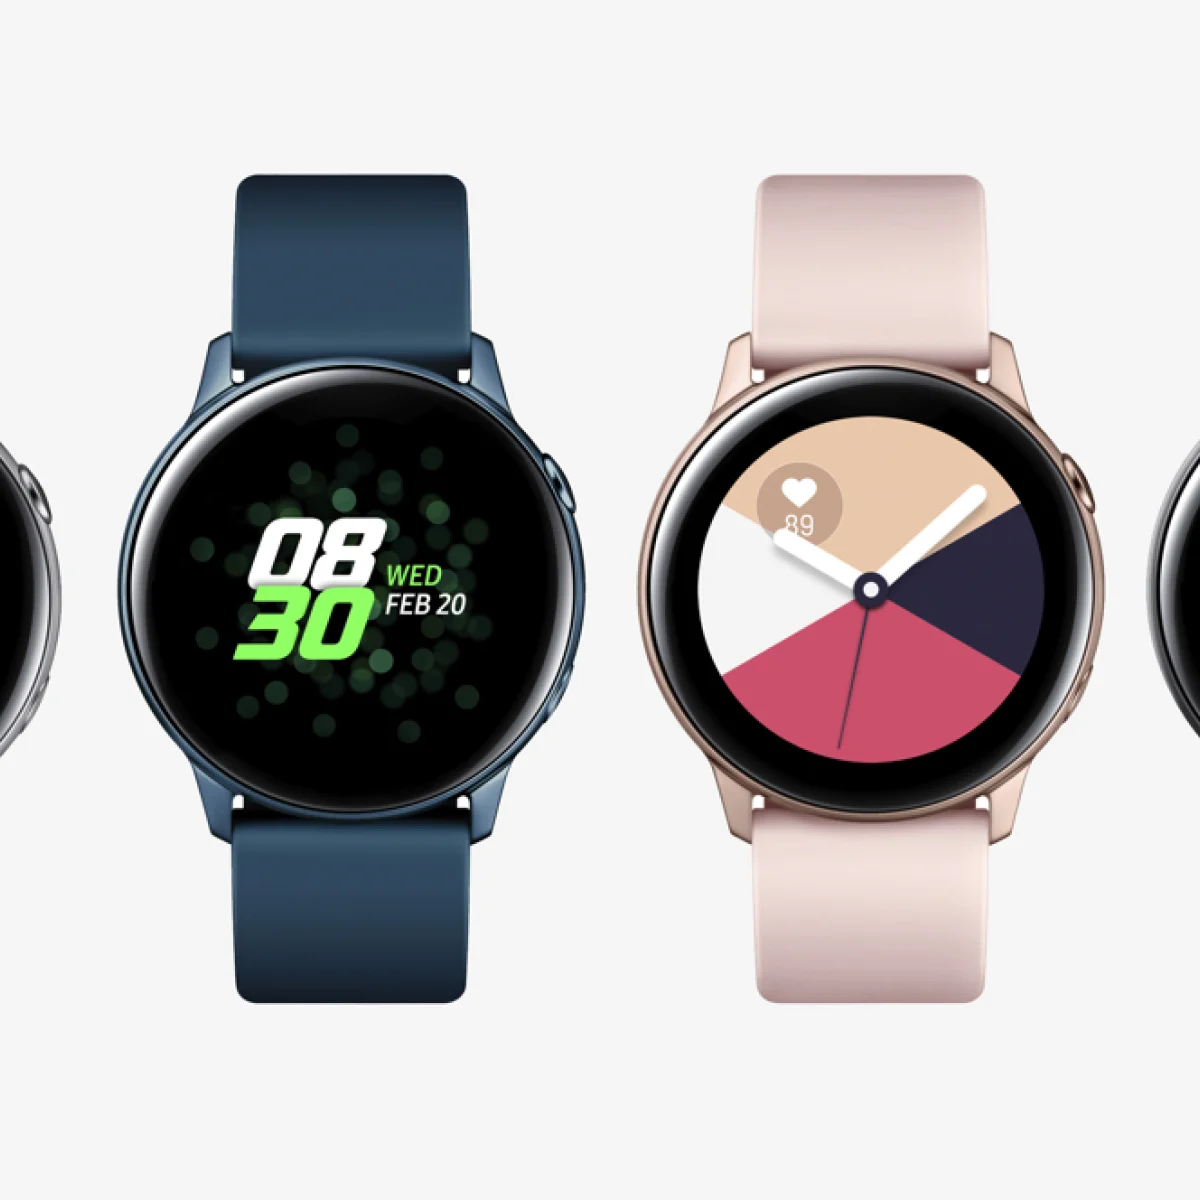 Samsung Galaxy Watch 7 Pro Gears Up for Potential India Launch with BIS Certification